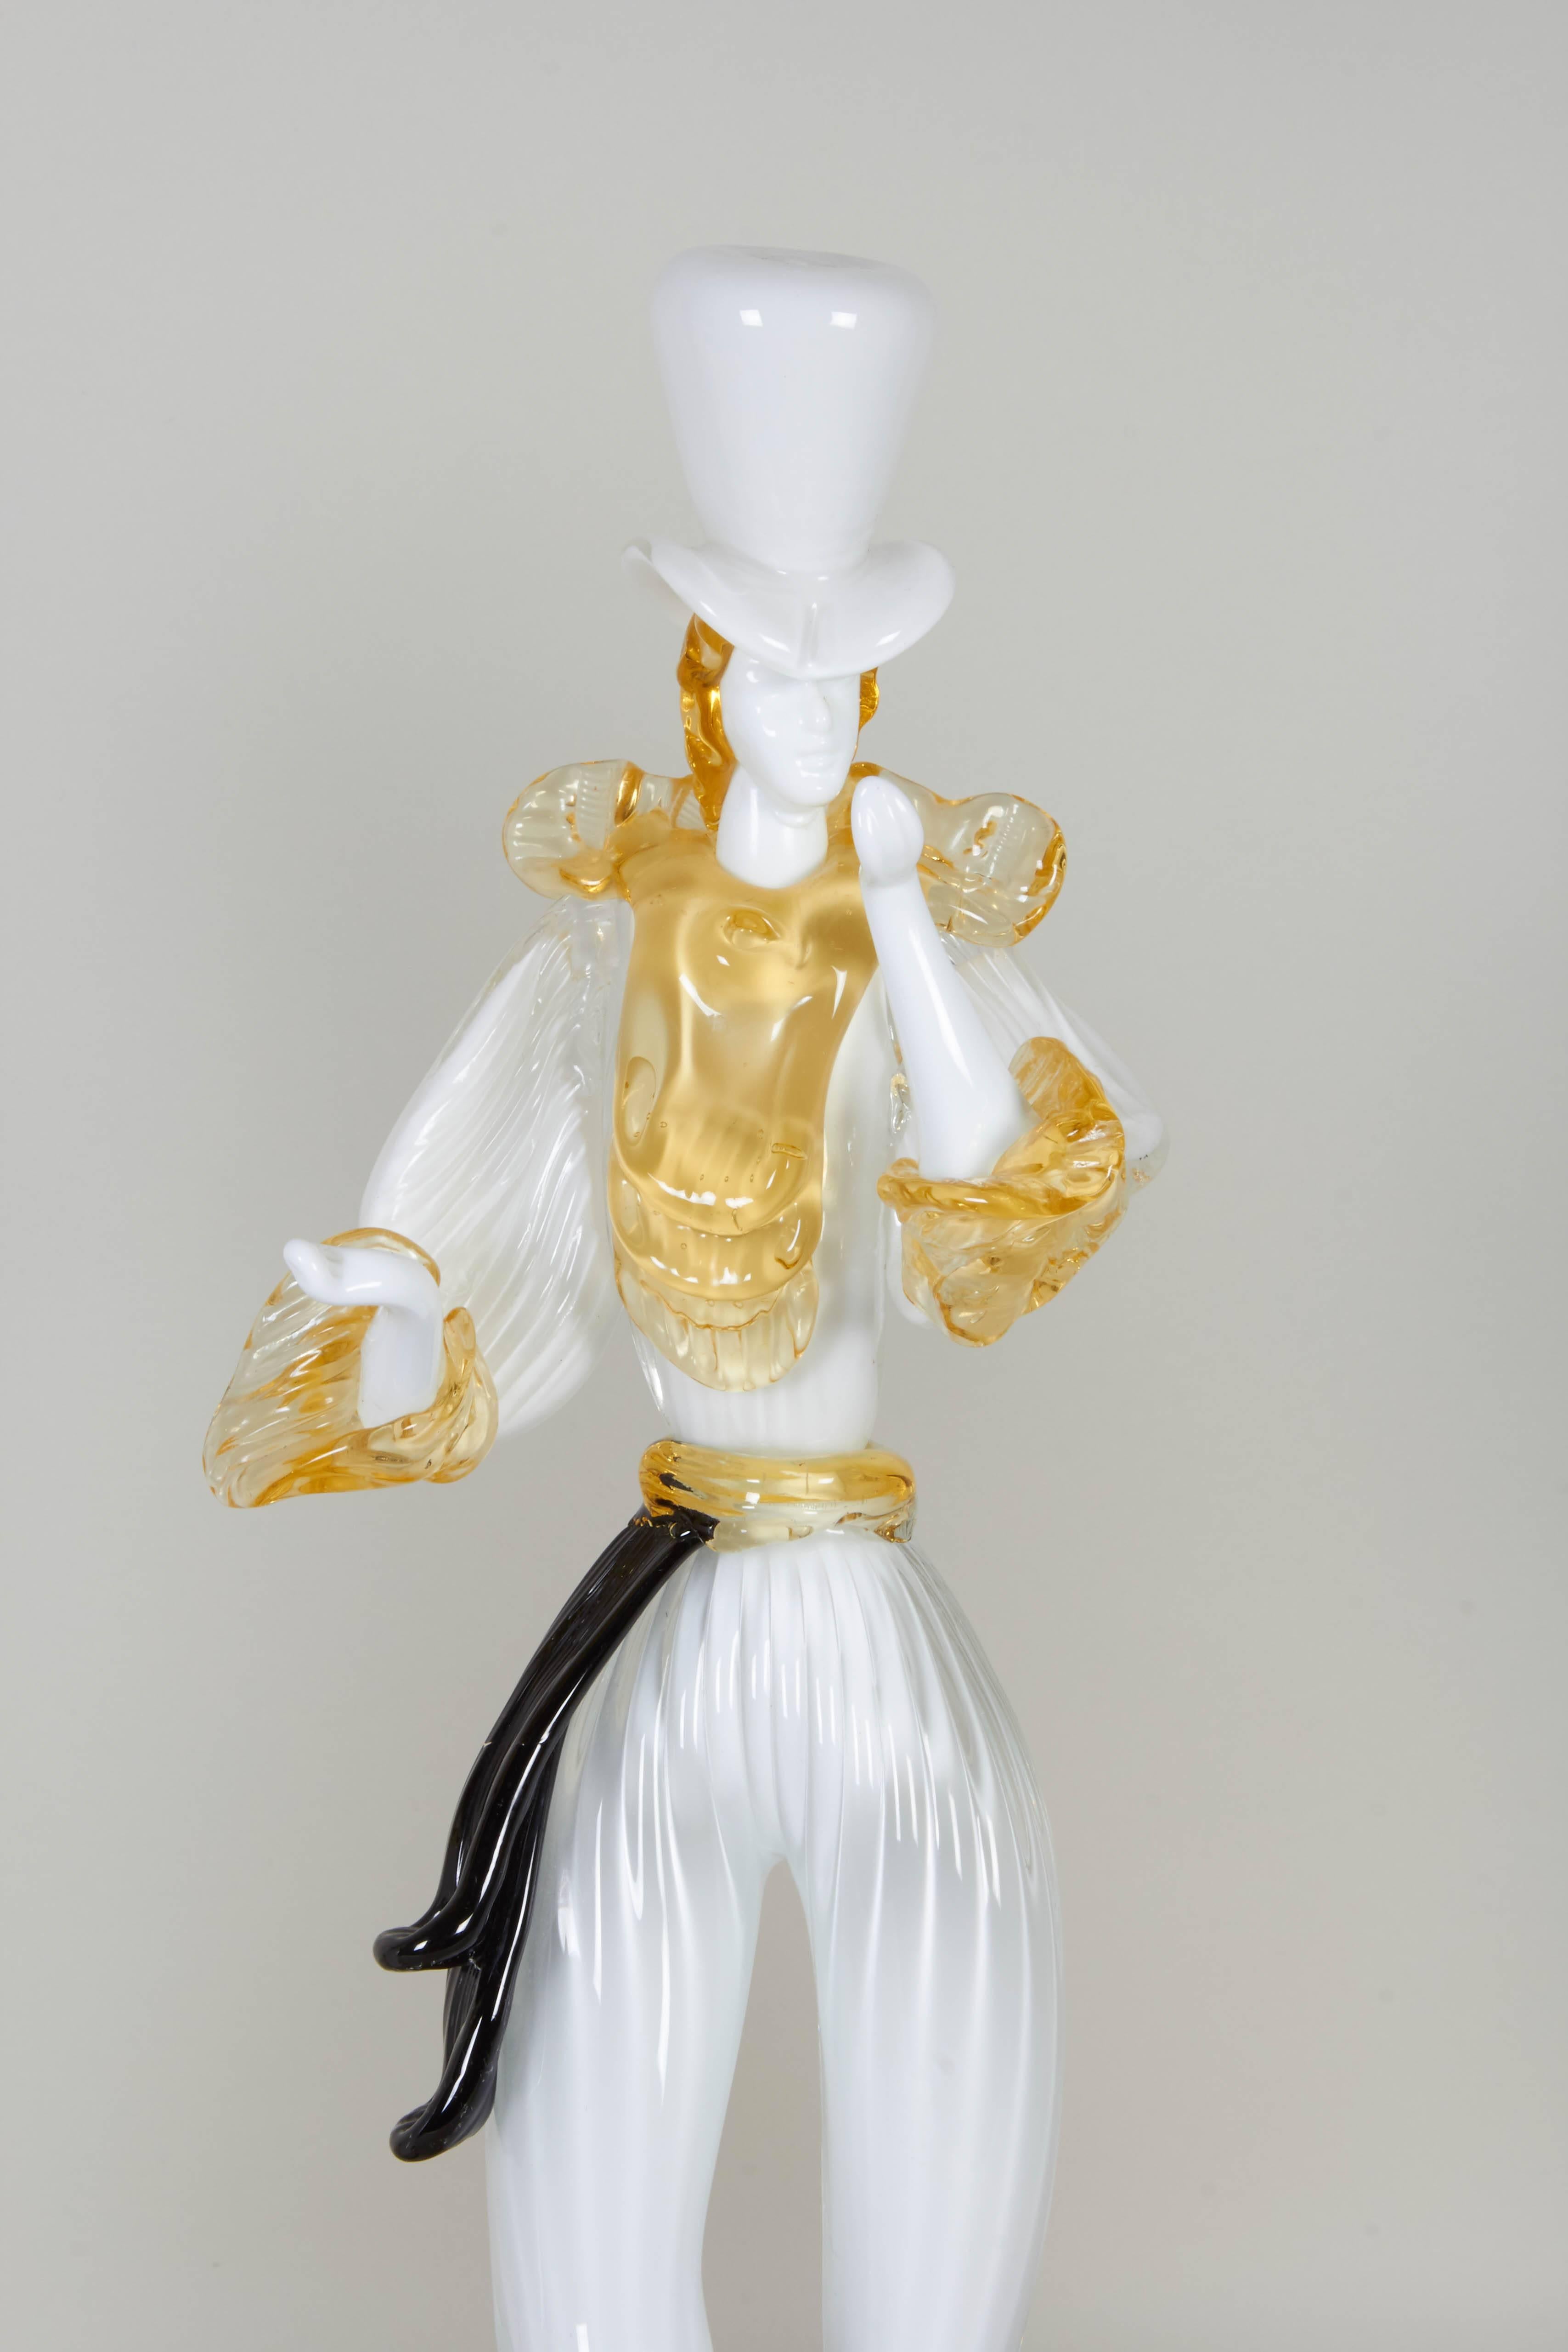 Italian figurines of a man and woman in blown Murano glass, produced circa 1960s, depicted in white and yellow, with highlights of black and purple, each elegantly dressed and posing gracefully. Includes original label [Formia/Vetri di Murano/Made